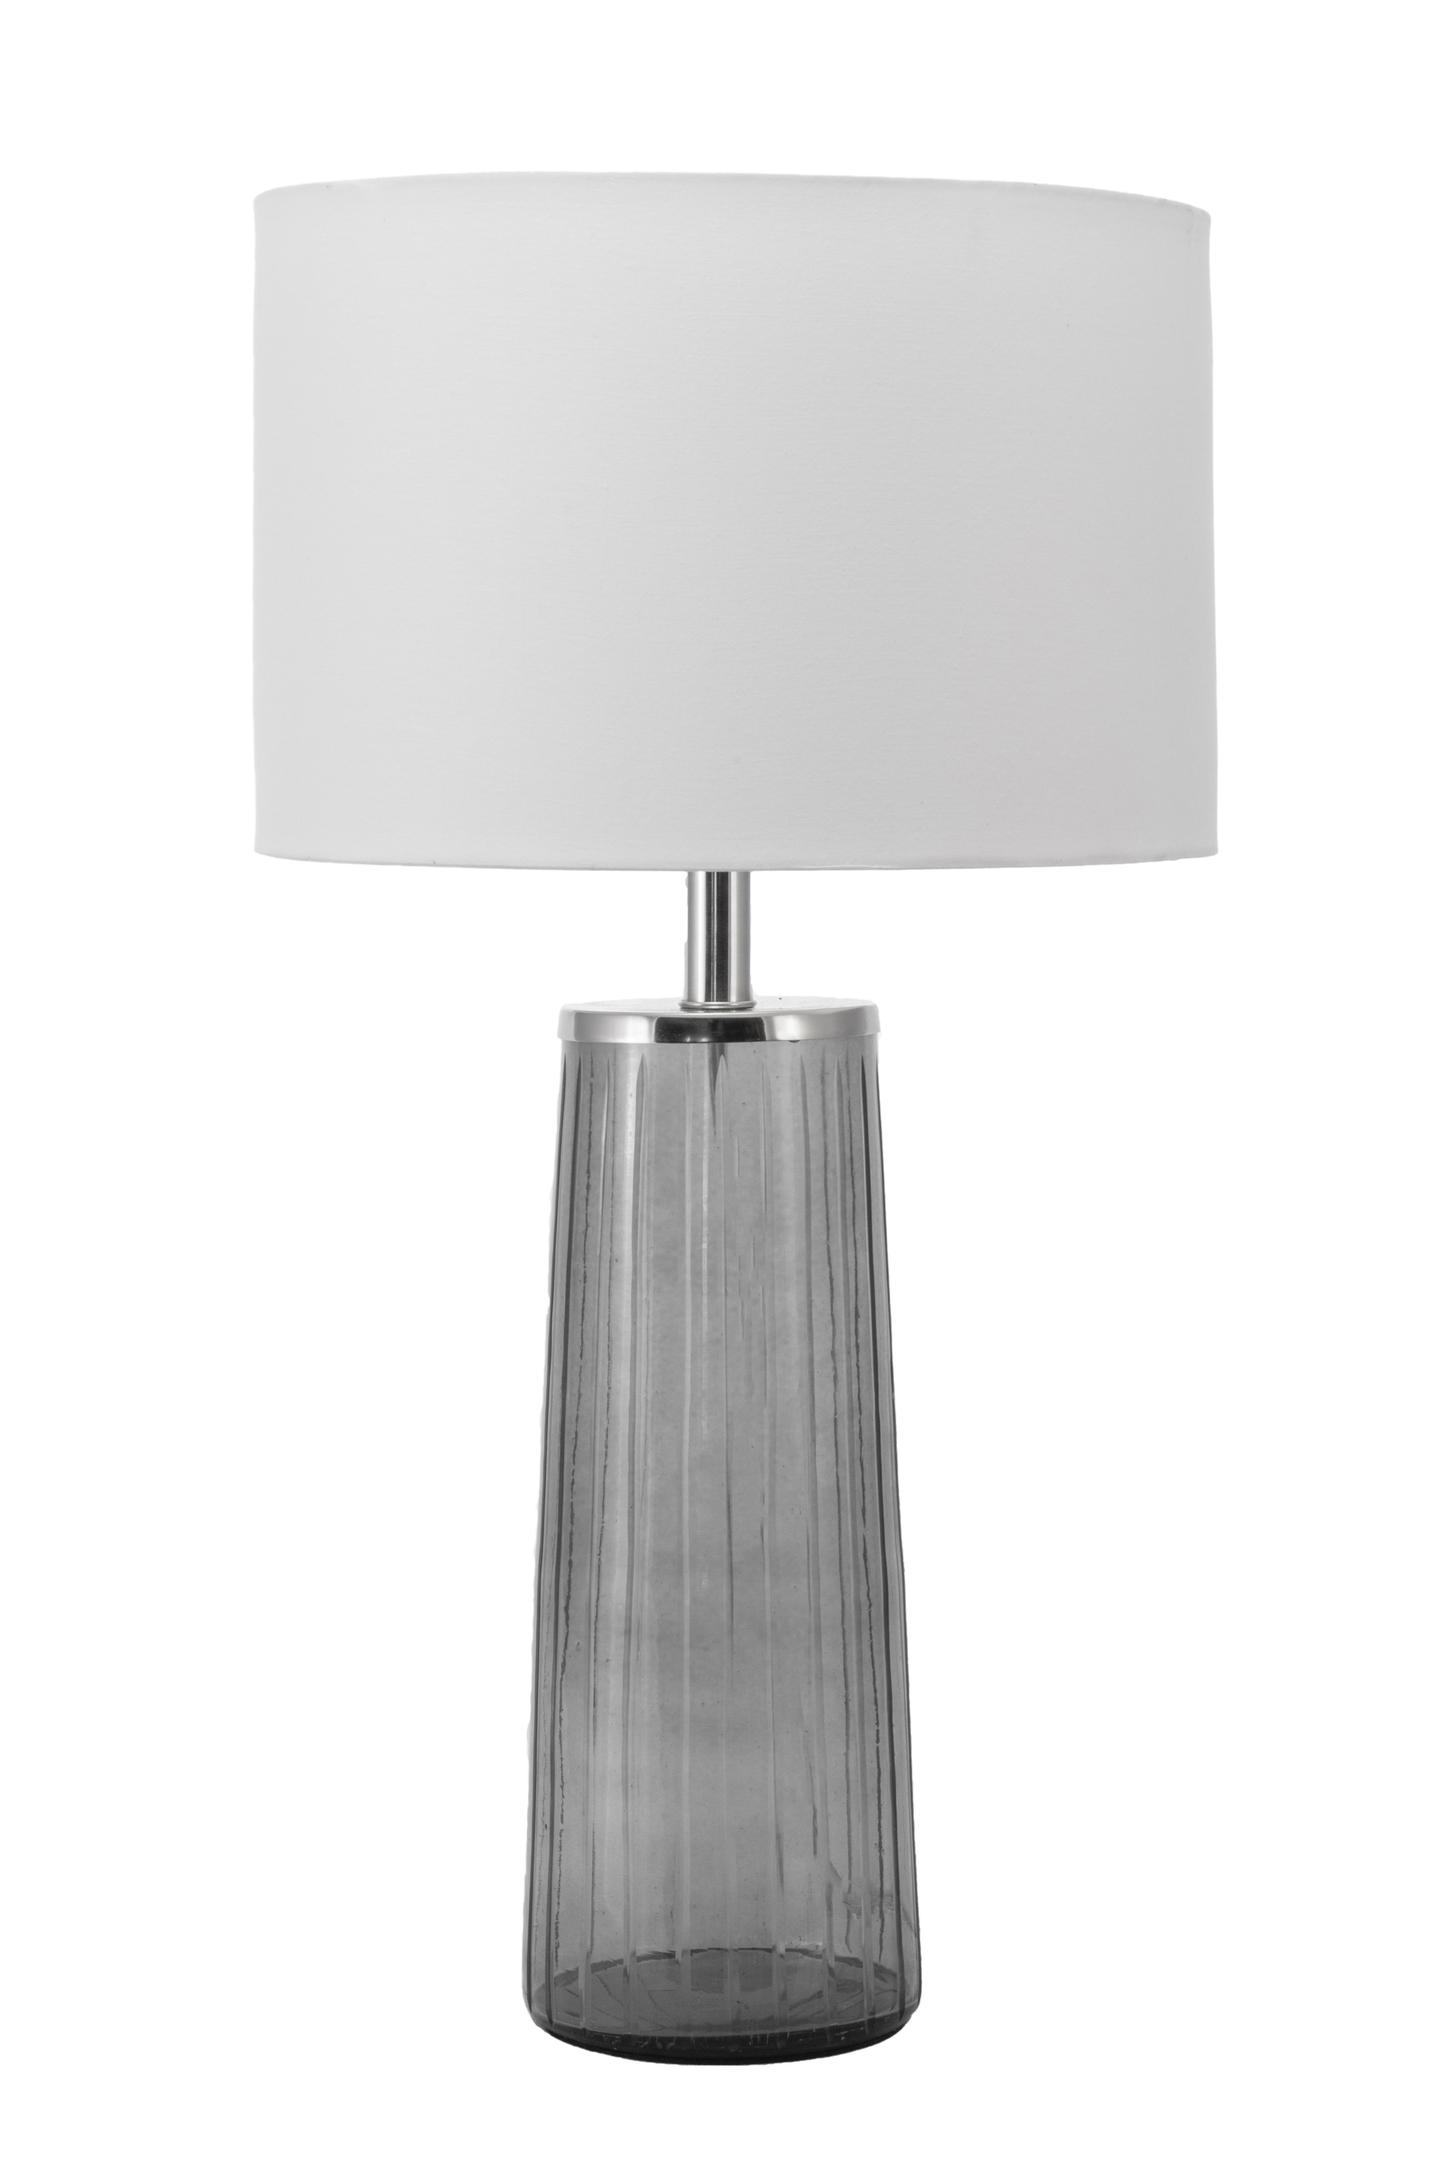 Wylie 22" Glass Table Lamp - Image 2